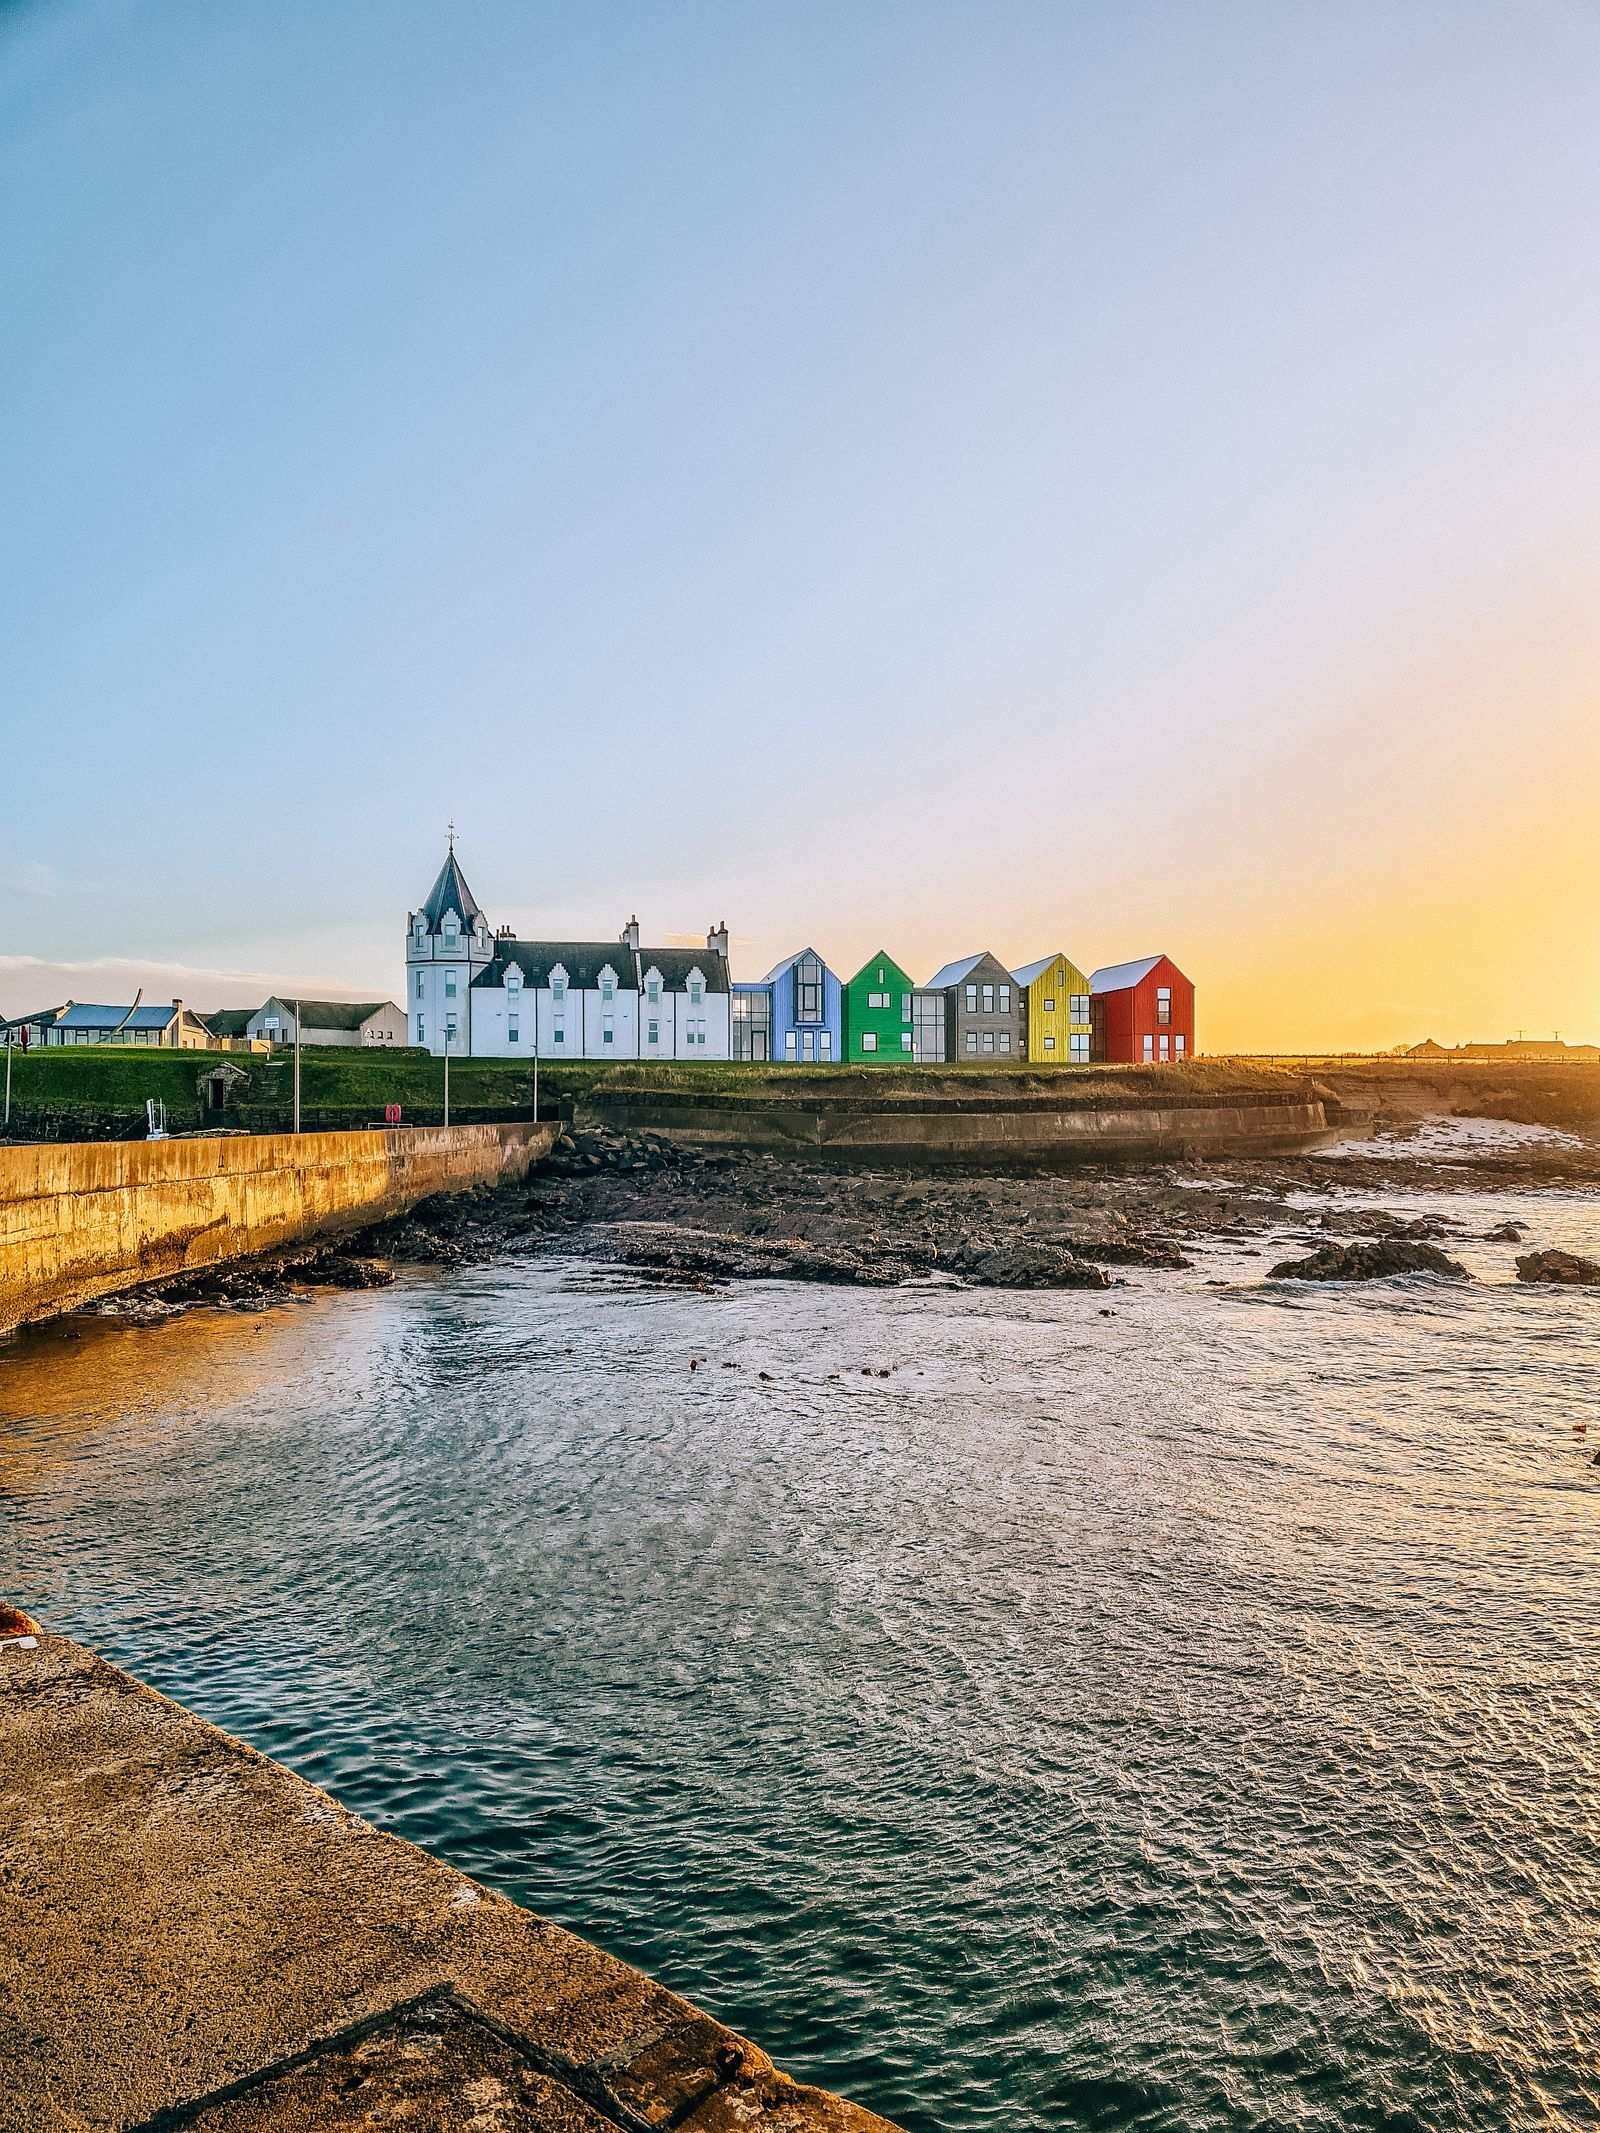 A view of John O’Groats Inn from the sea wall, looking back to the land across a harbour. On the land is a white turreted building with 5 colourful buildings next to it in blue, green, grey, yellow and red. Sky is orange at sunset